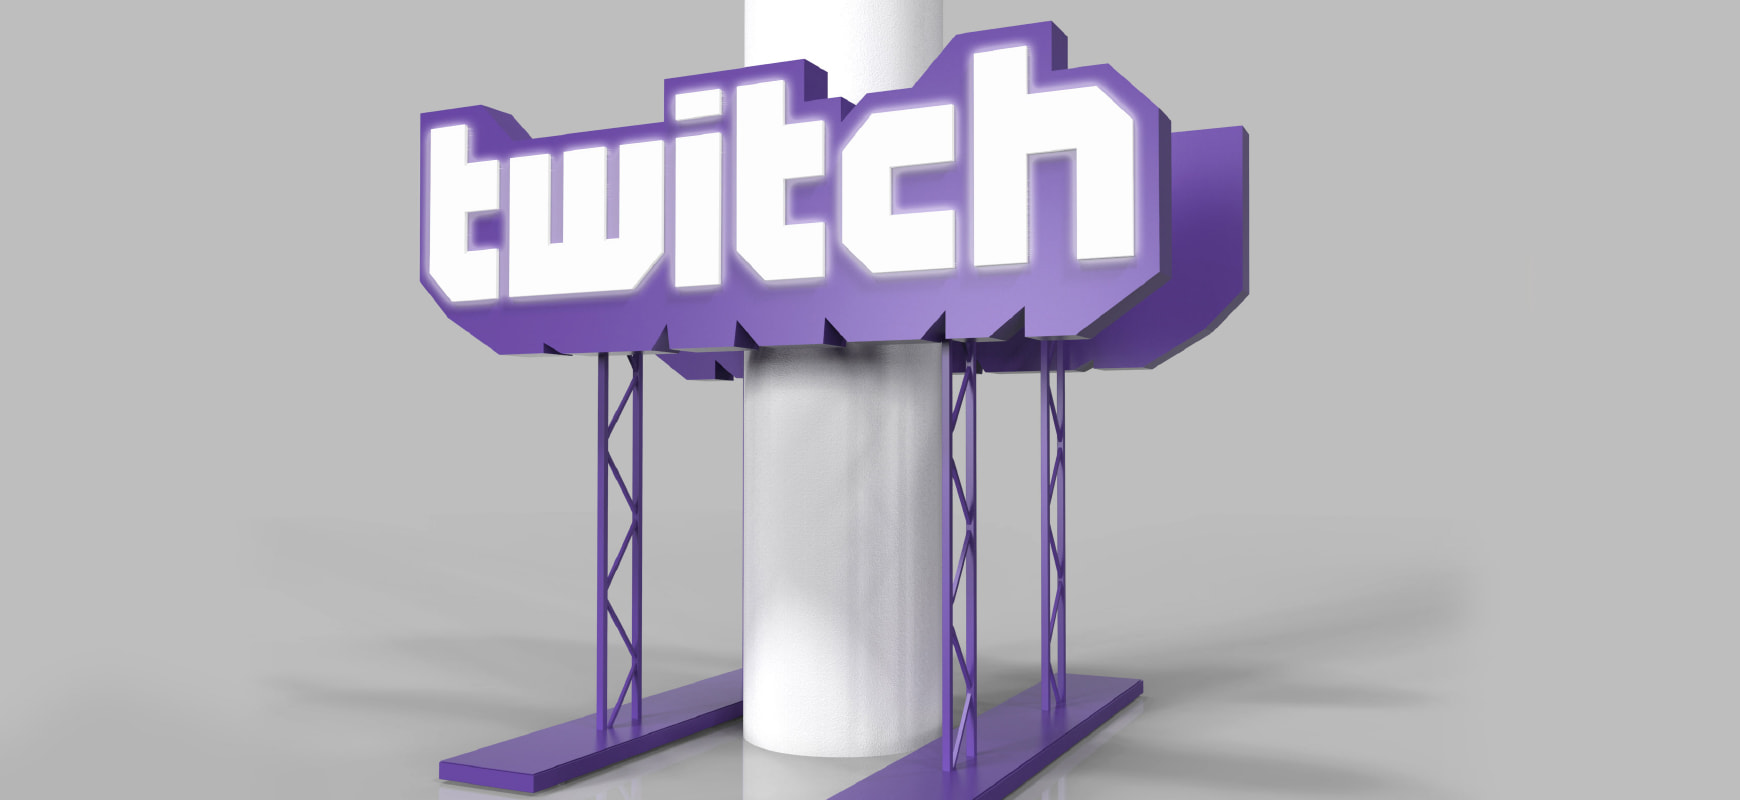 Twitch business light up sign in 3D rendering